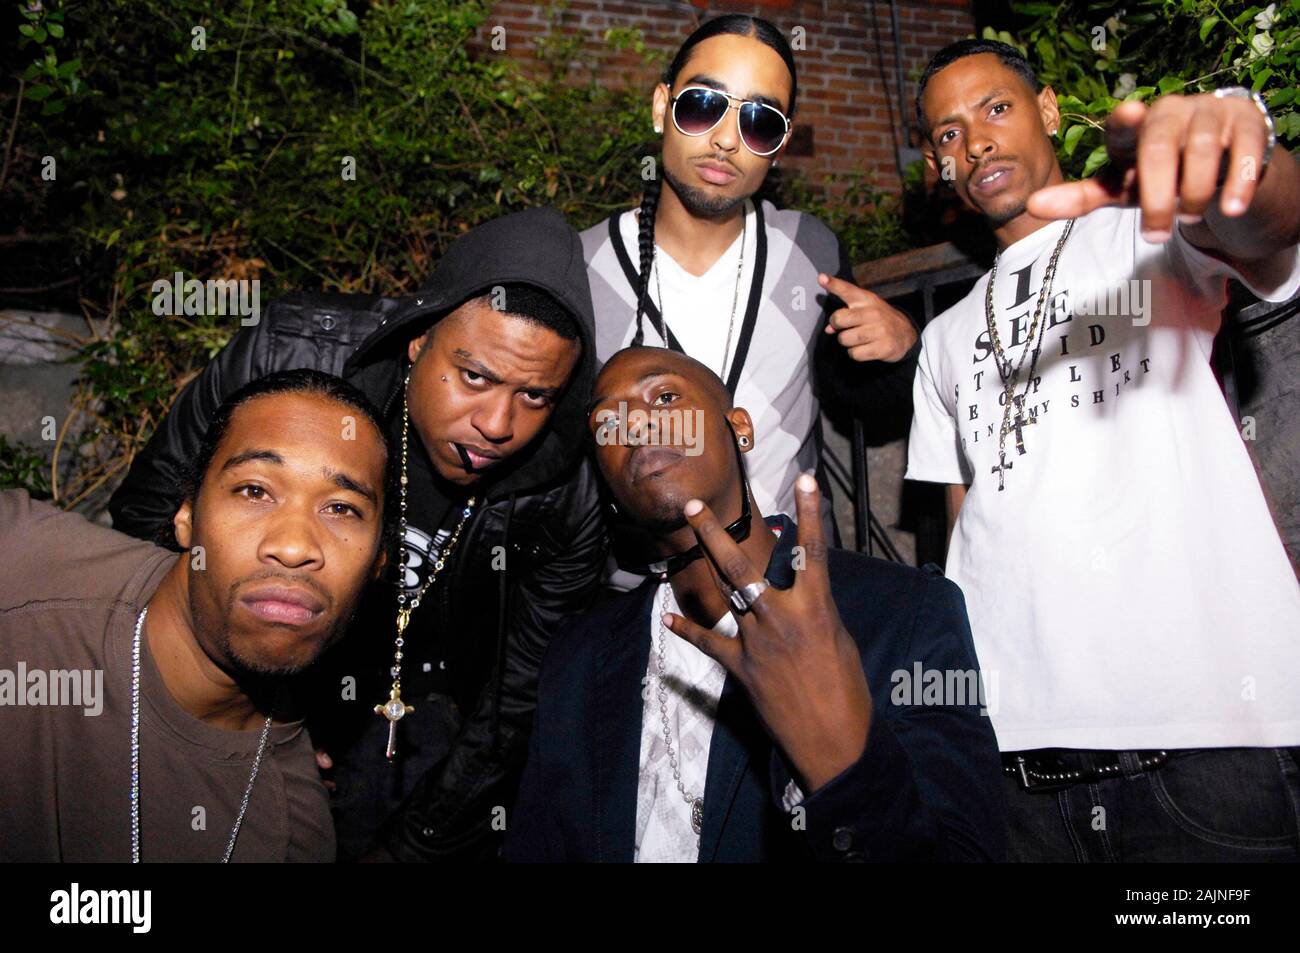 (L-R) LA Buck, DJ Paul, Rapper Shorty Mack, Truth and SK at Les Deux on July 1, 2010 in Los Angeles, California. Stock Photo